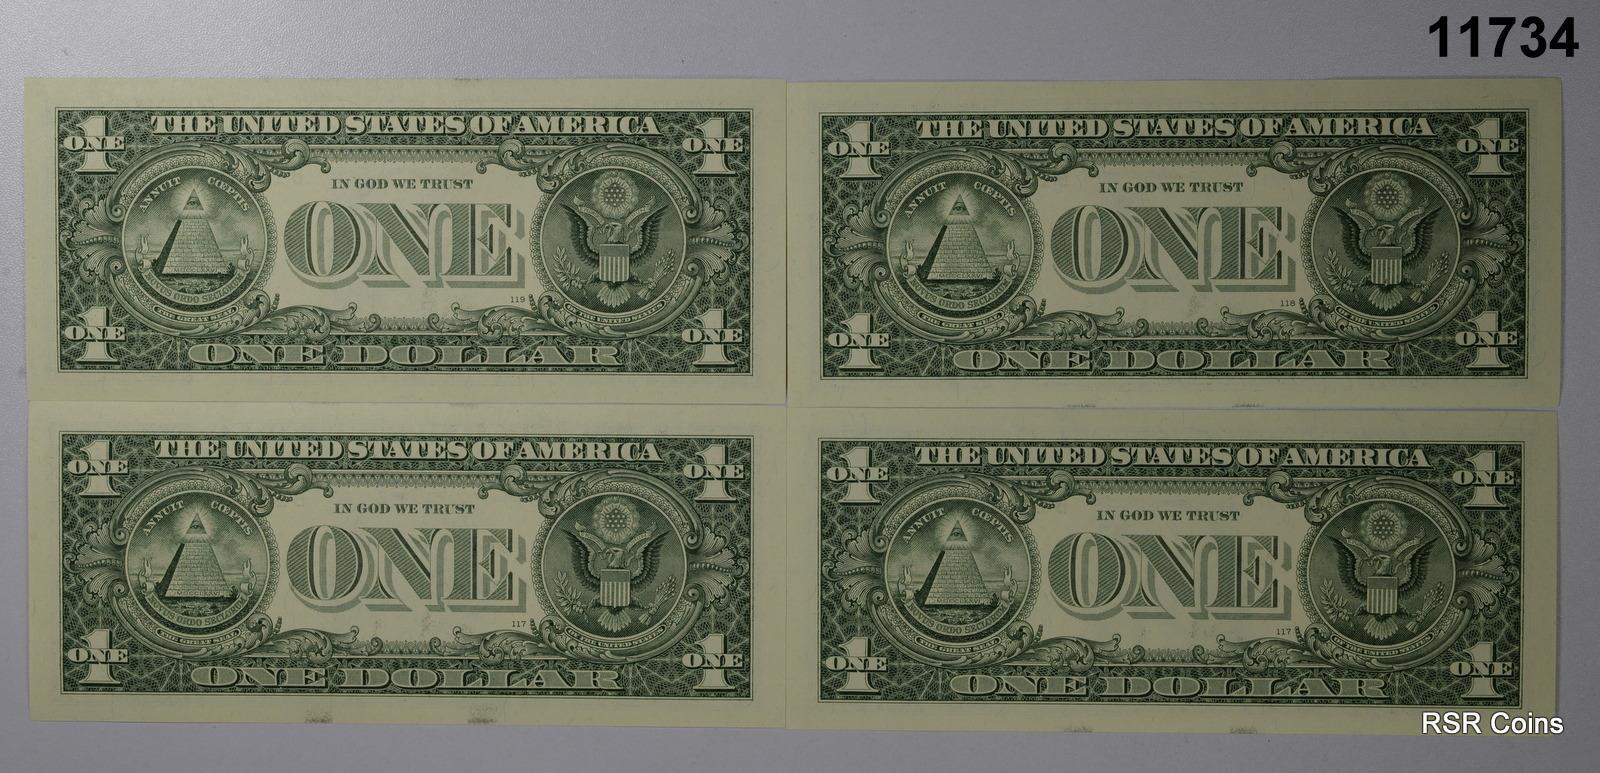 2003 (4) FOUR FEDERAL RESERVE NOTE SEQUENTIAL SERIAL NUMBERS CU! #11734